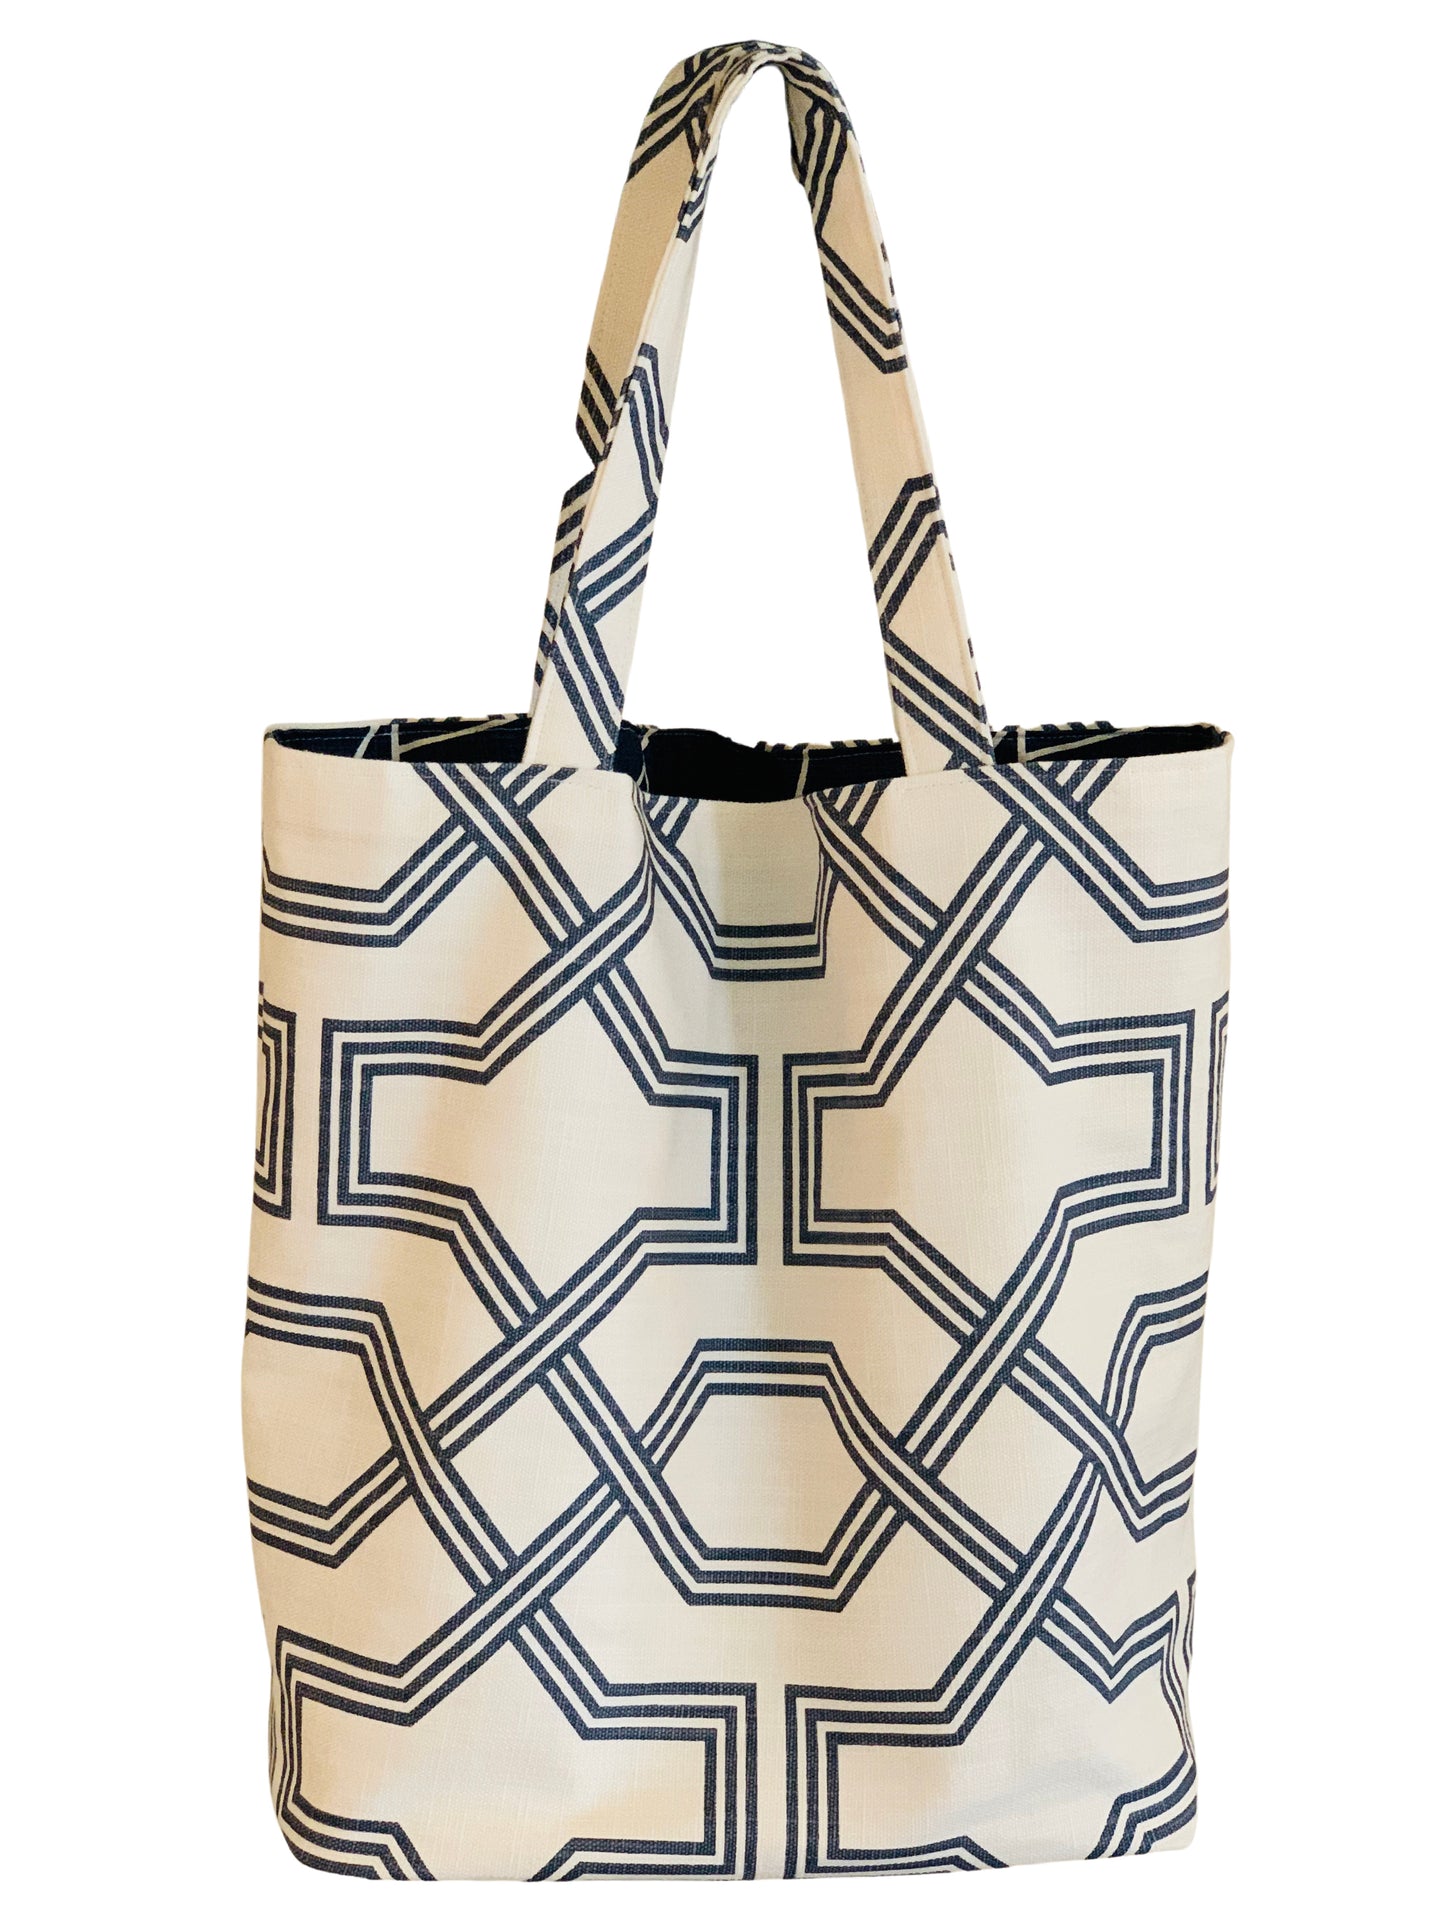 Tote Bag Hand Crafted of Premium Cotton Canvas Linen, Contrasting Lining and Interior Triple Pockets, Navy Blue Geometric Patterns